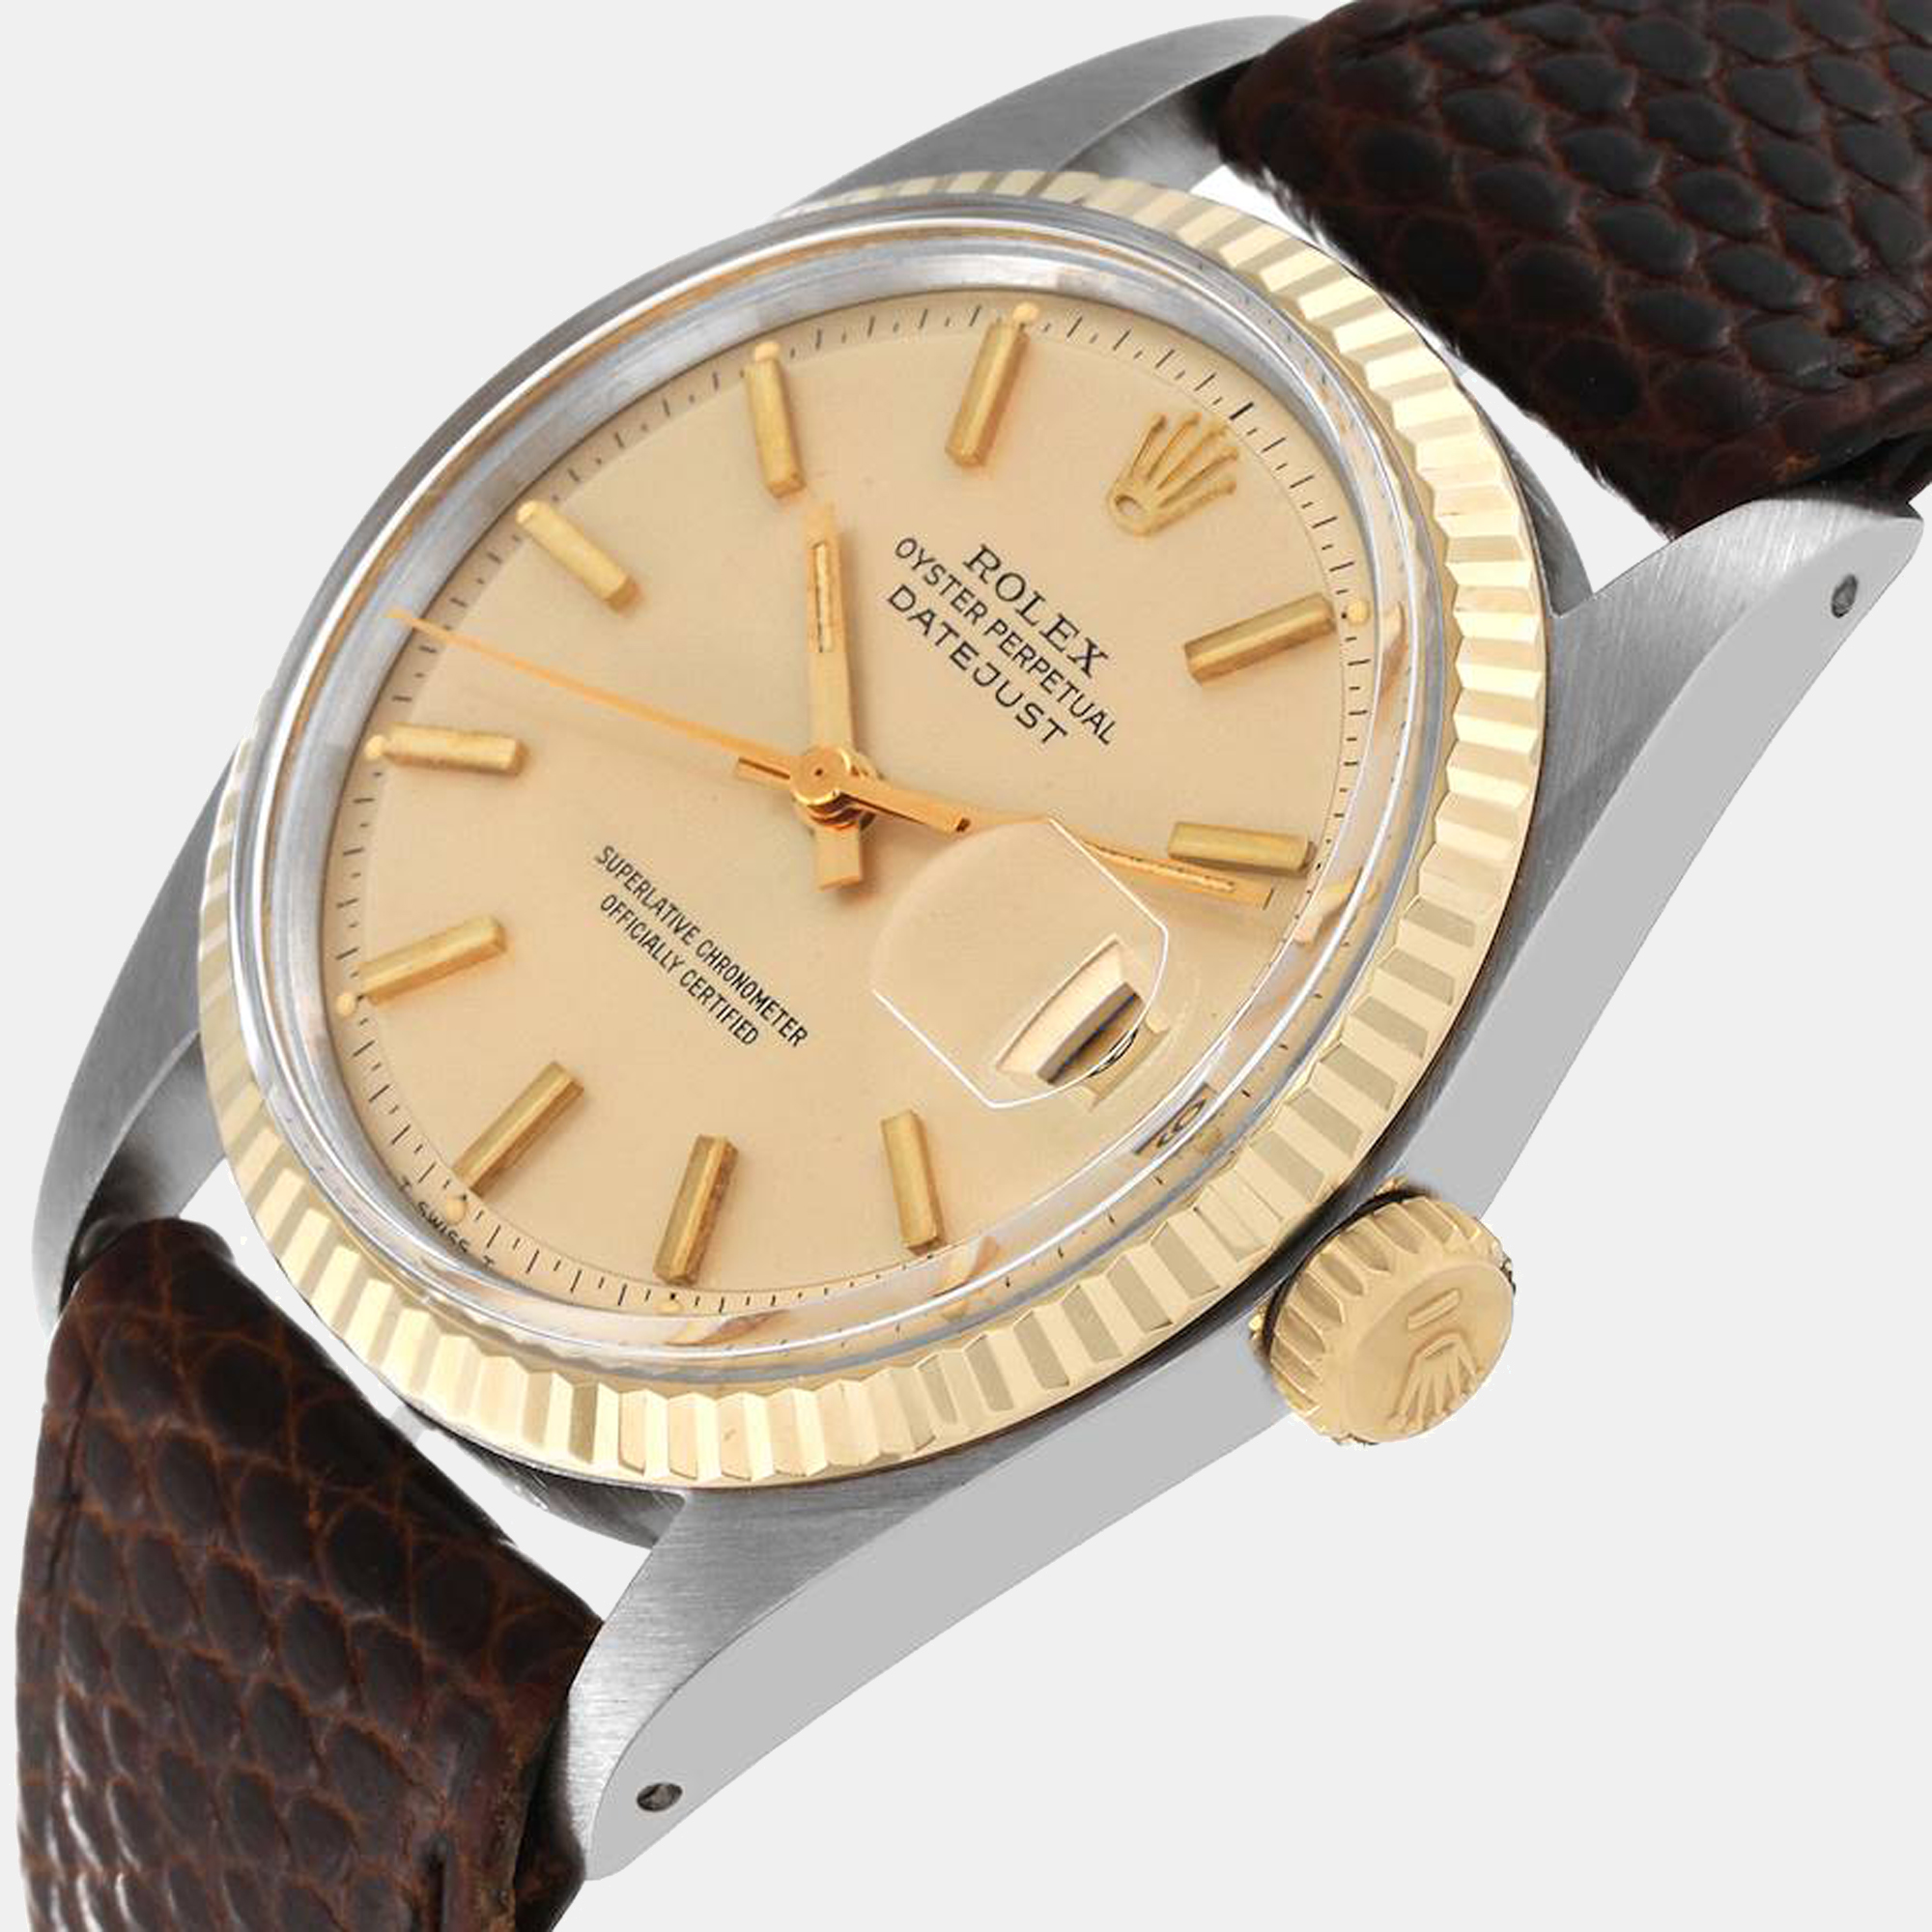 

Rolex Silver 18K Yellow Gold And Stainless Steel Datejust 1601 Men's Wristwatch 36 mm